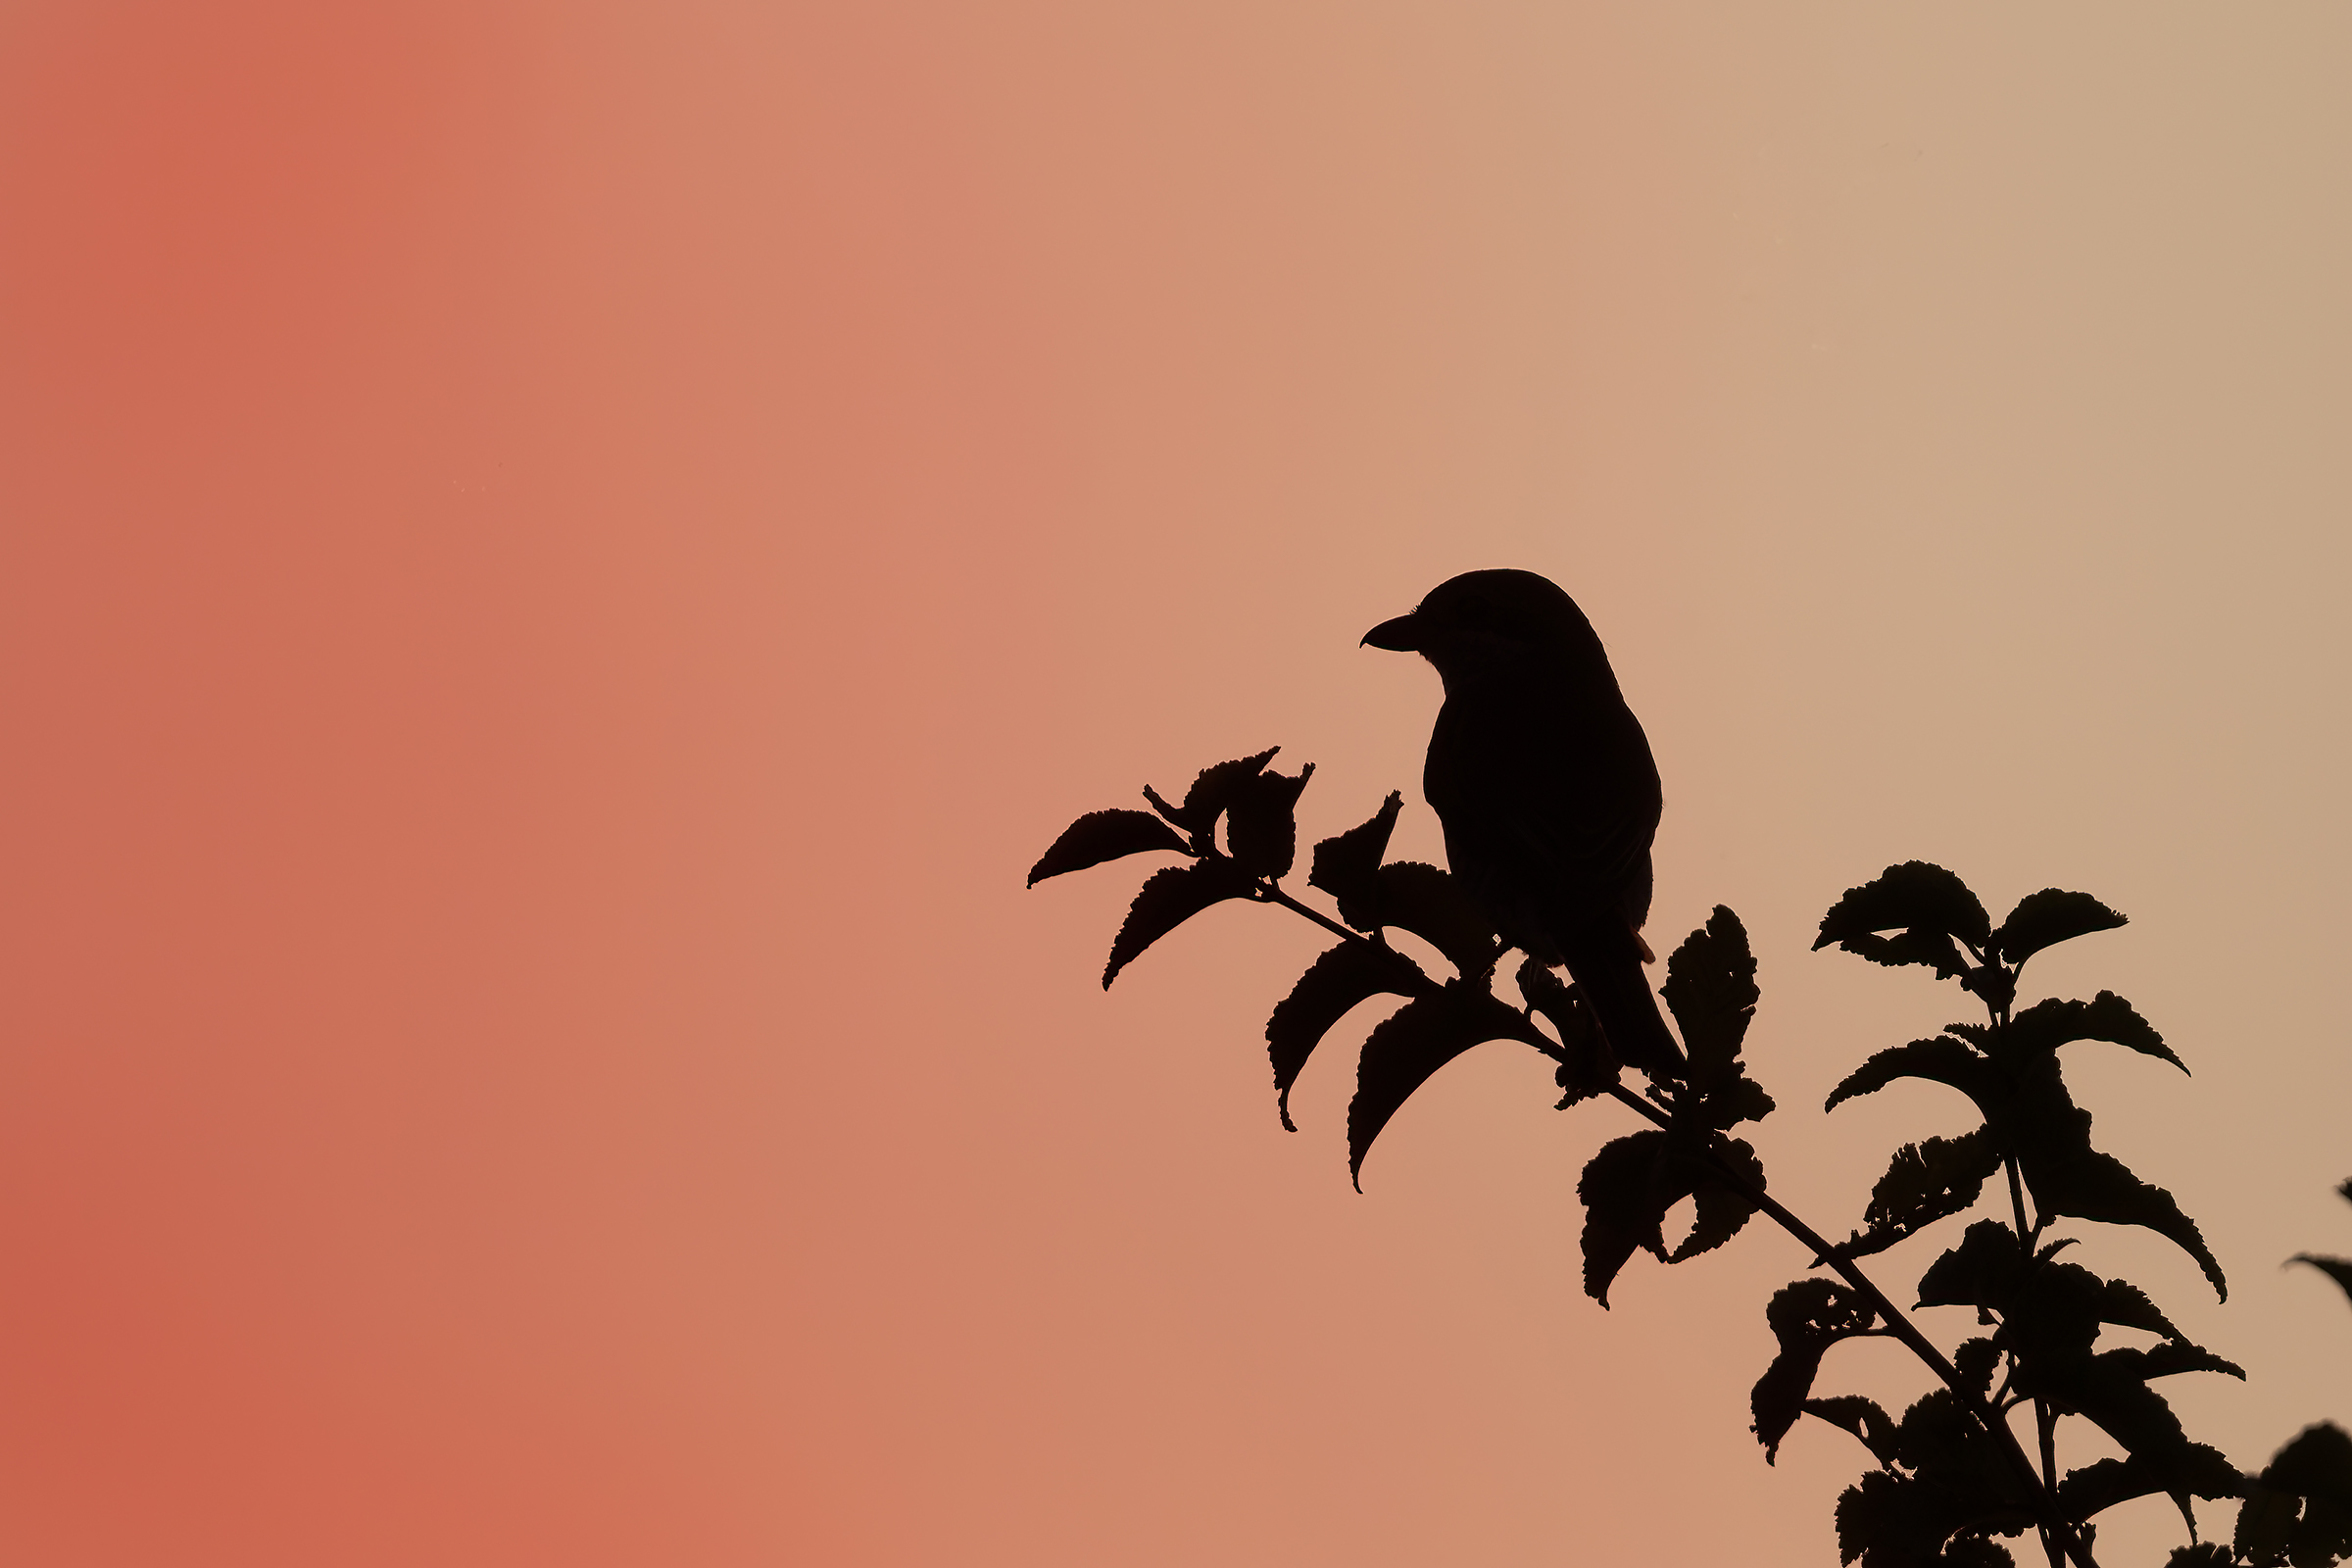 The small shrike and the sunset...